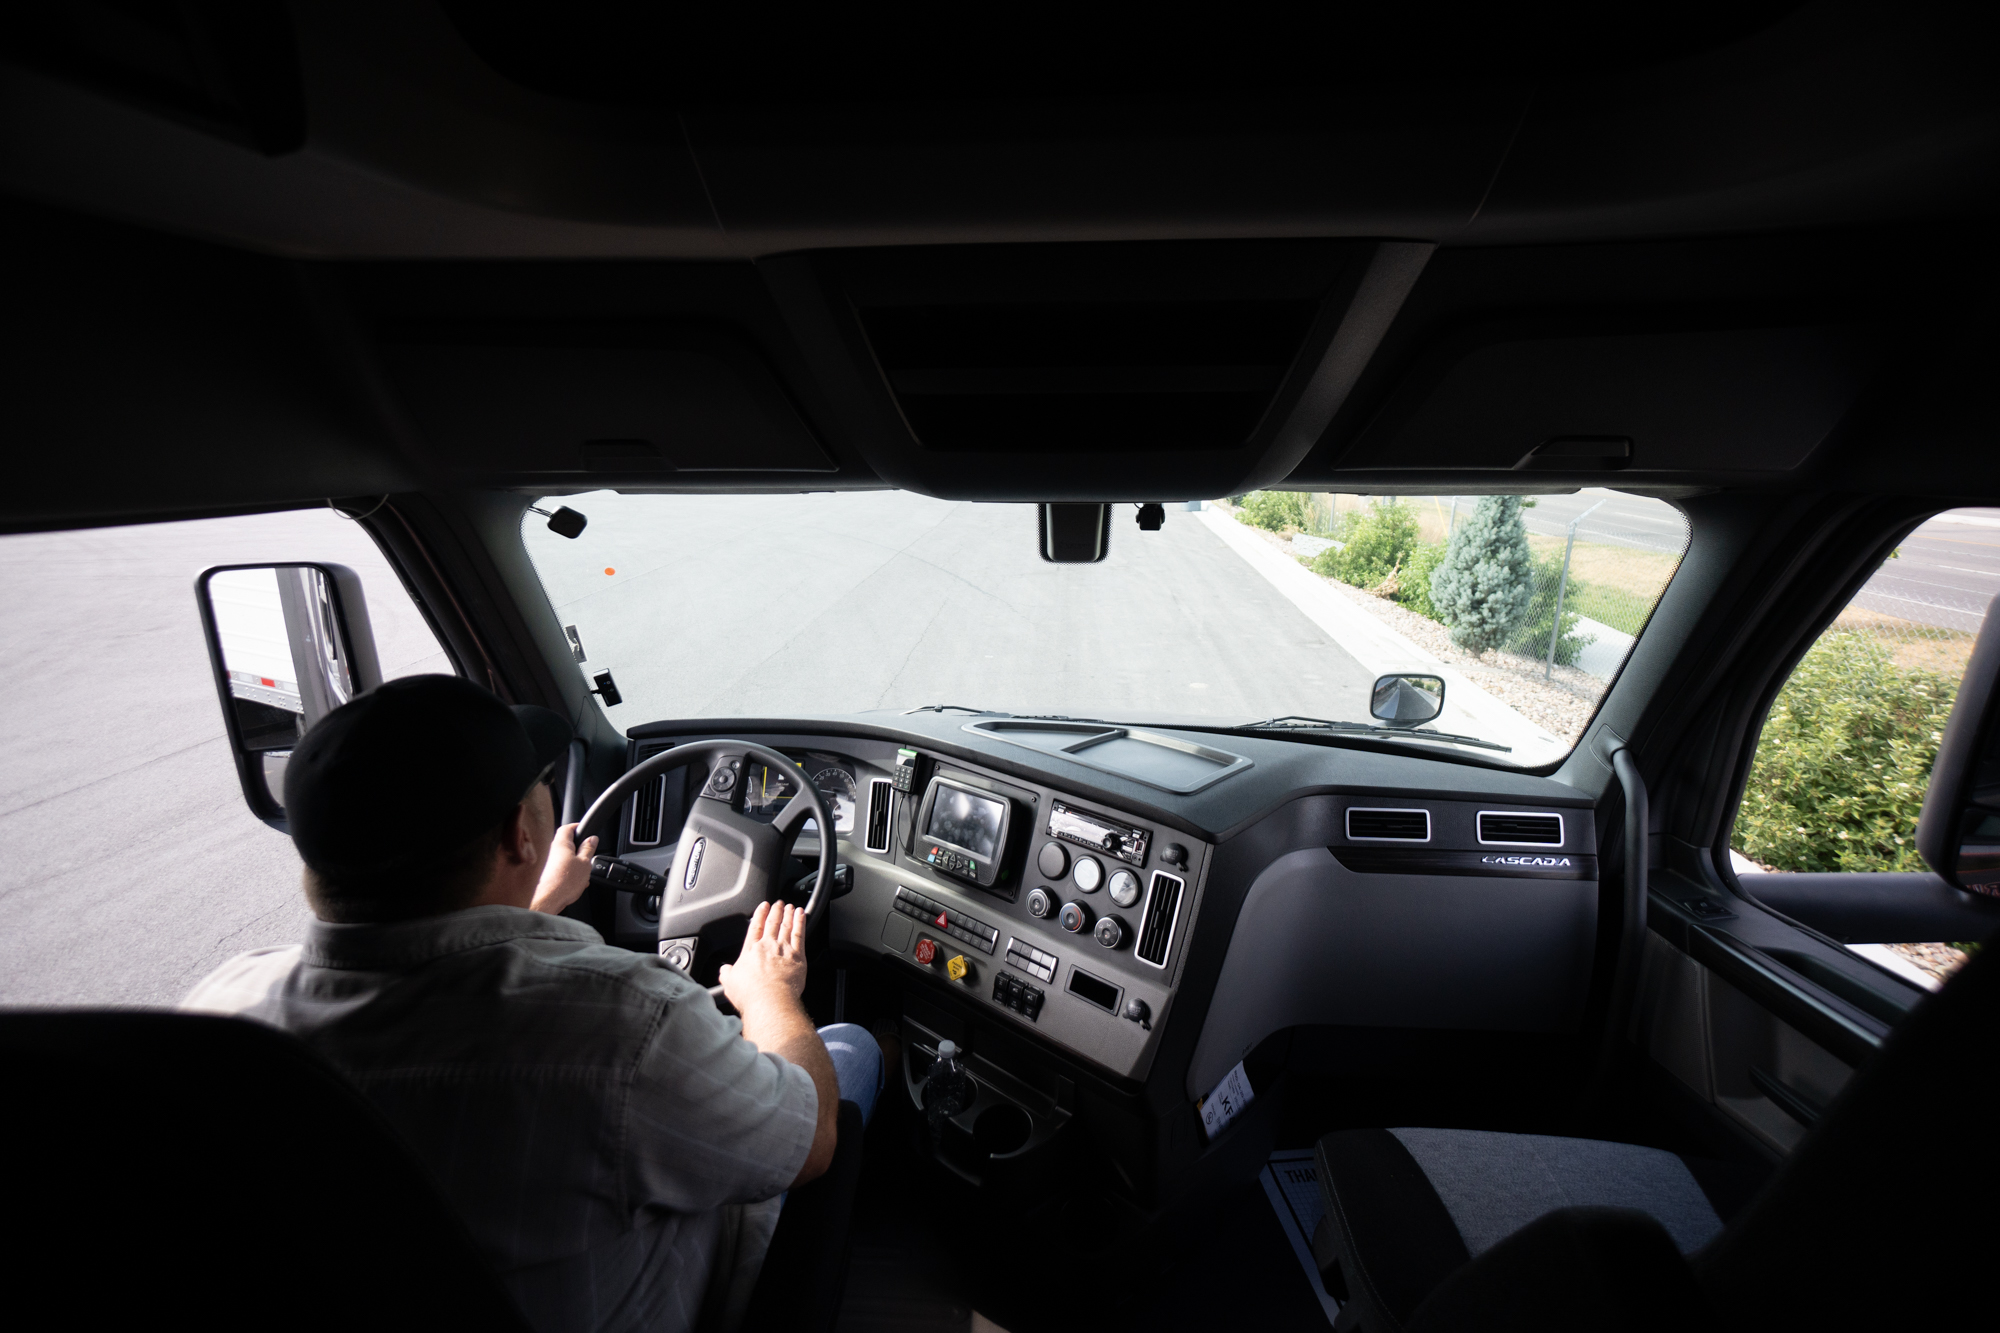 View from the inside of a truck with a Pride employee driving